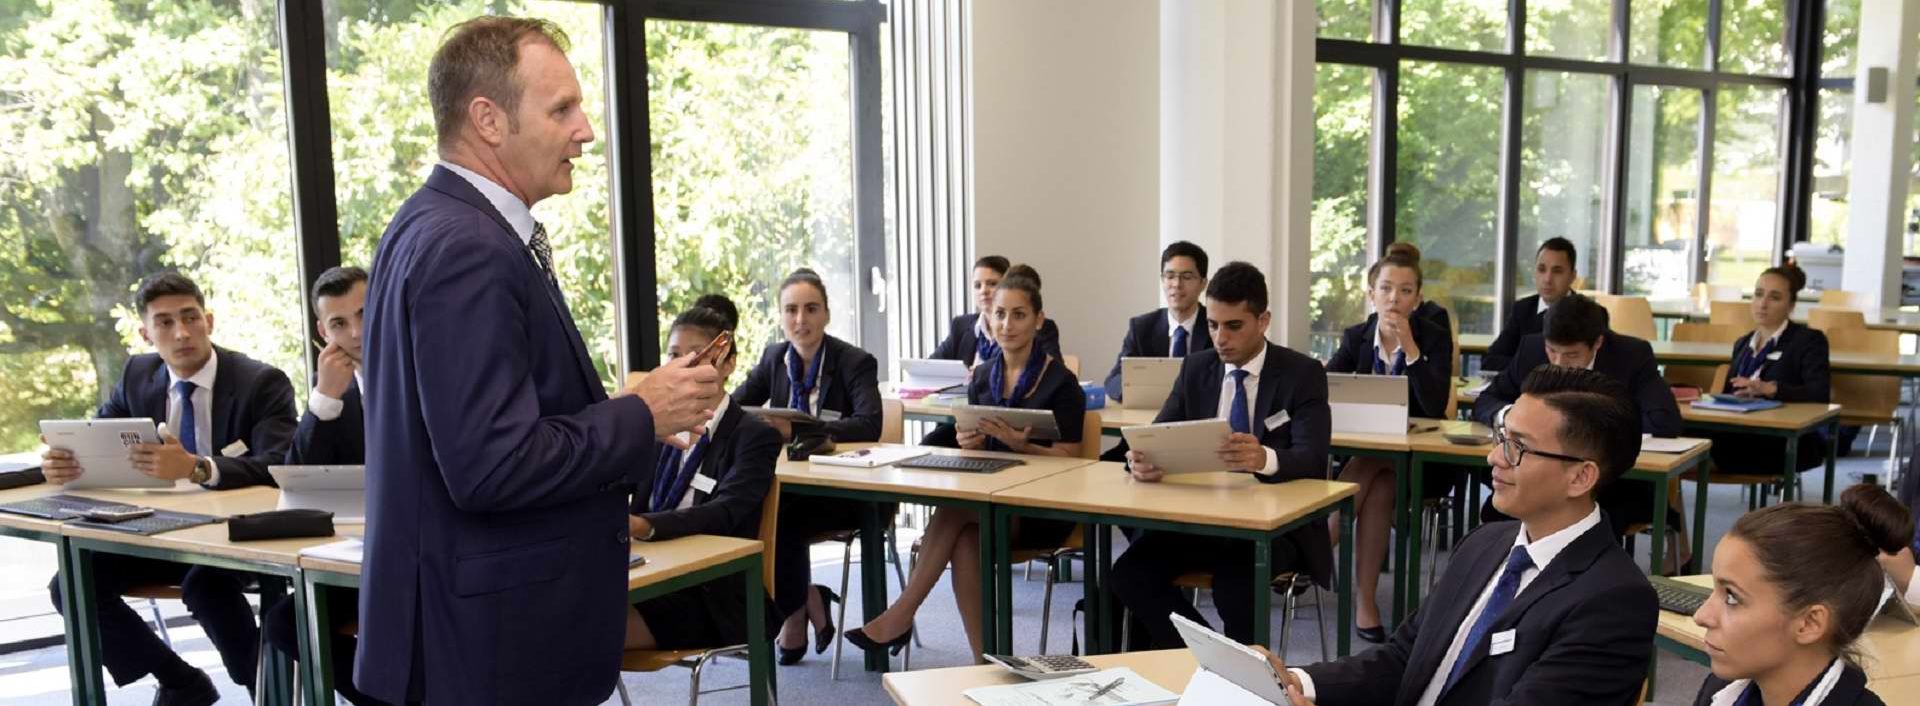 To Study in a Swiss Hotel Management School is a guarantee of quality and professionalism.